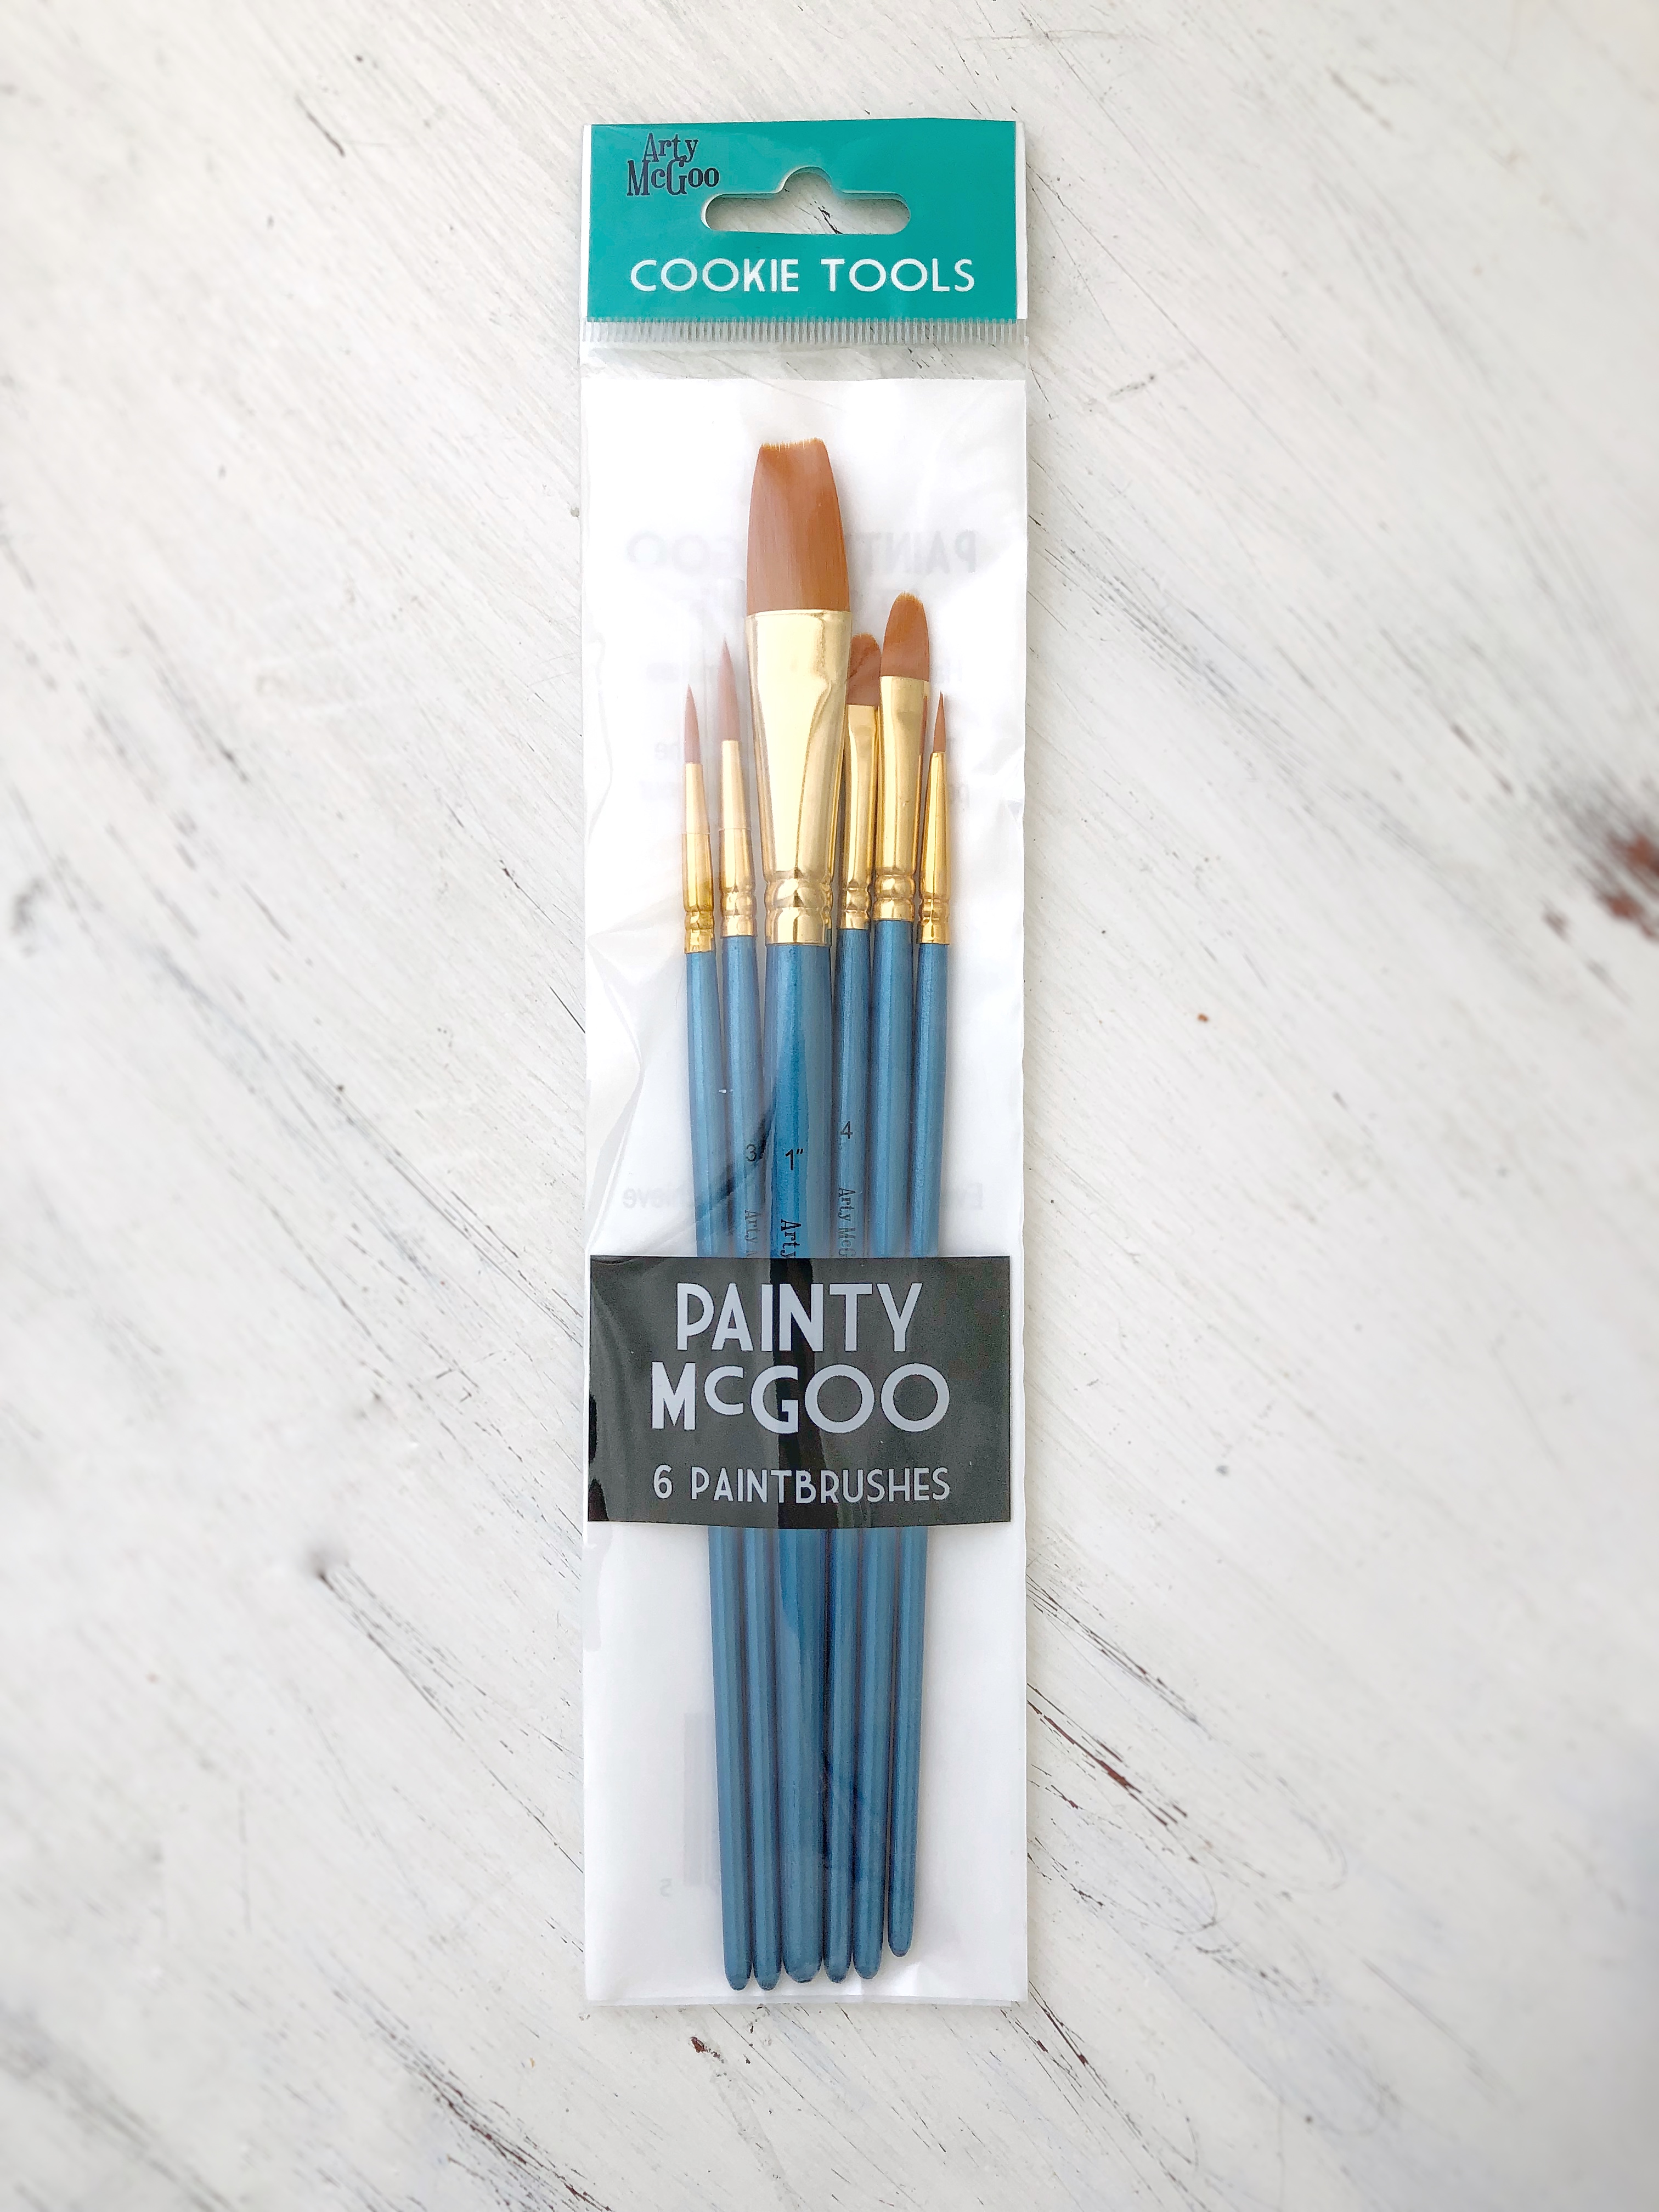 How to Choose the Right Paintbrushes for Your Art